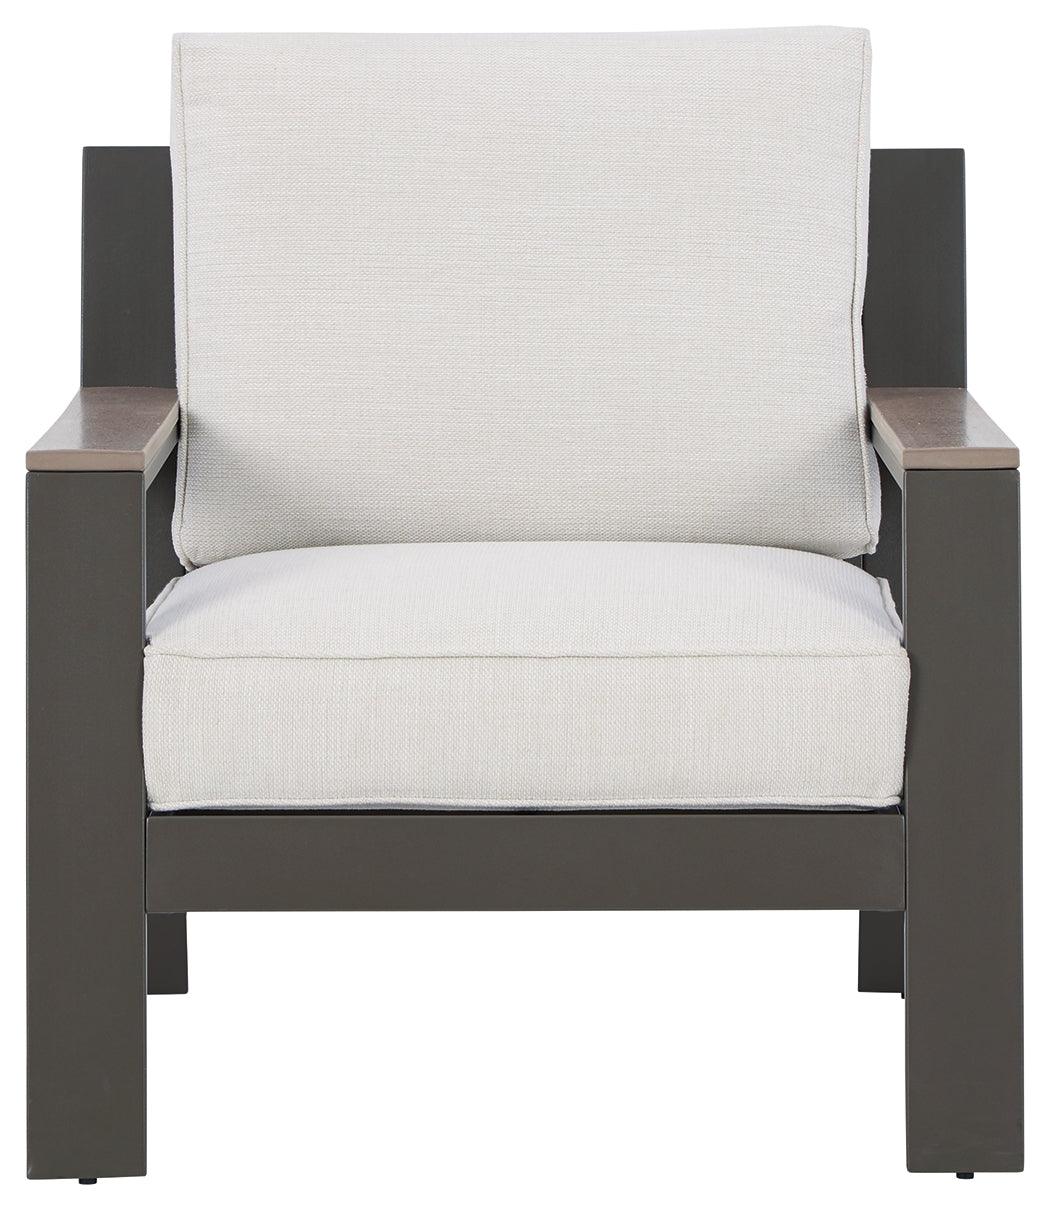 Tropicava Taupe/white Outdoor Lounge Chair With Cushion - Ella Furniture